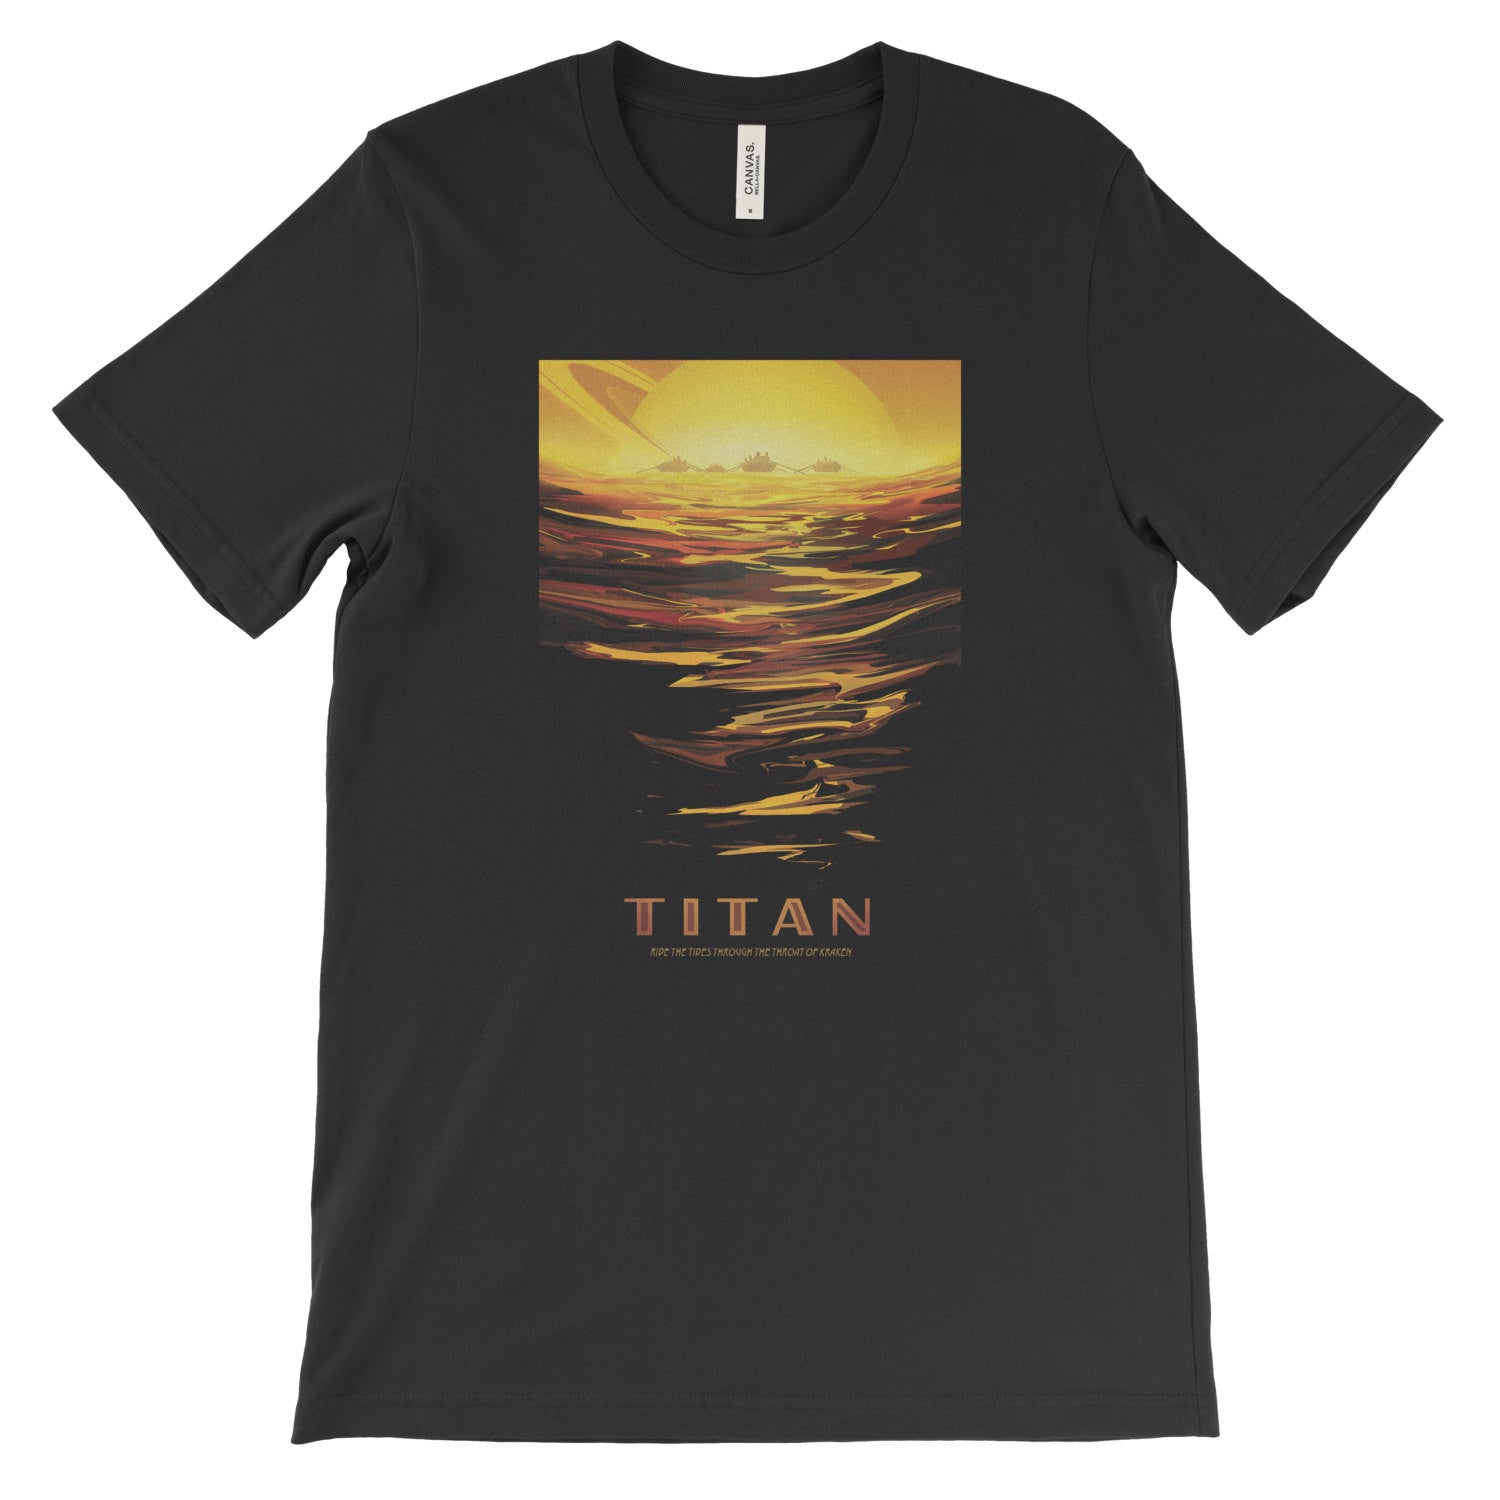 Titan T-Shirt from NASA's Visions of the Future - Mighty Circus